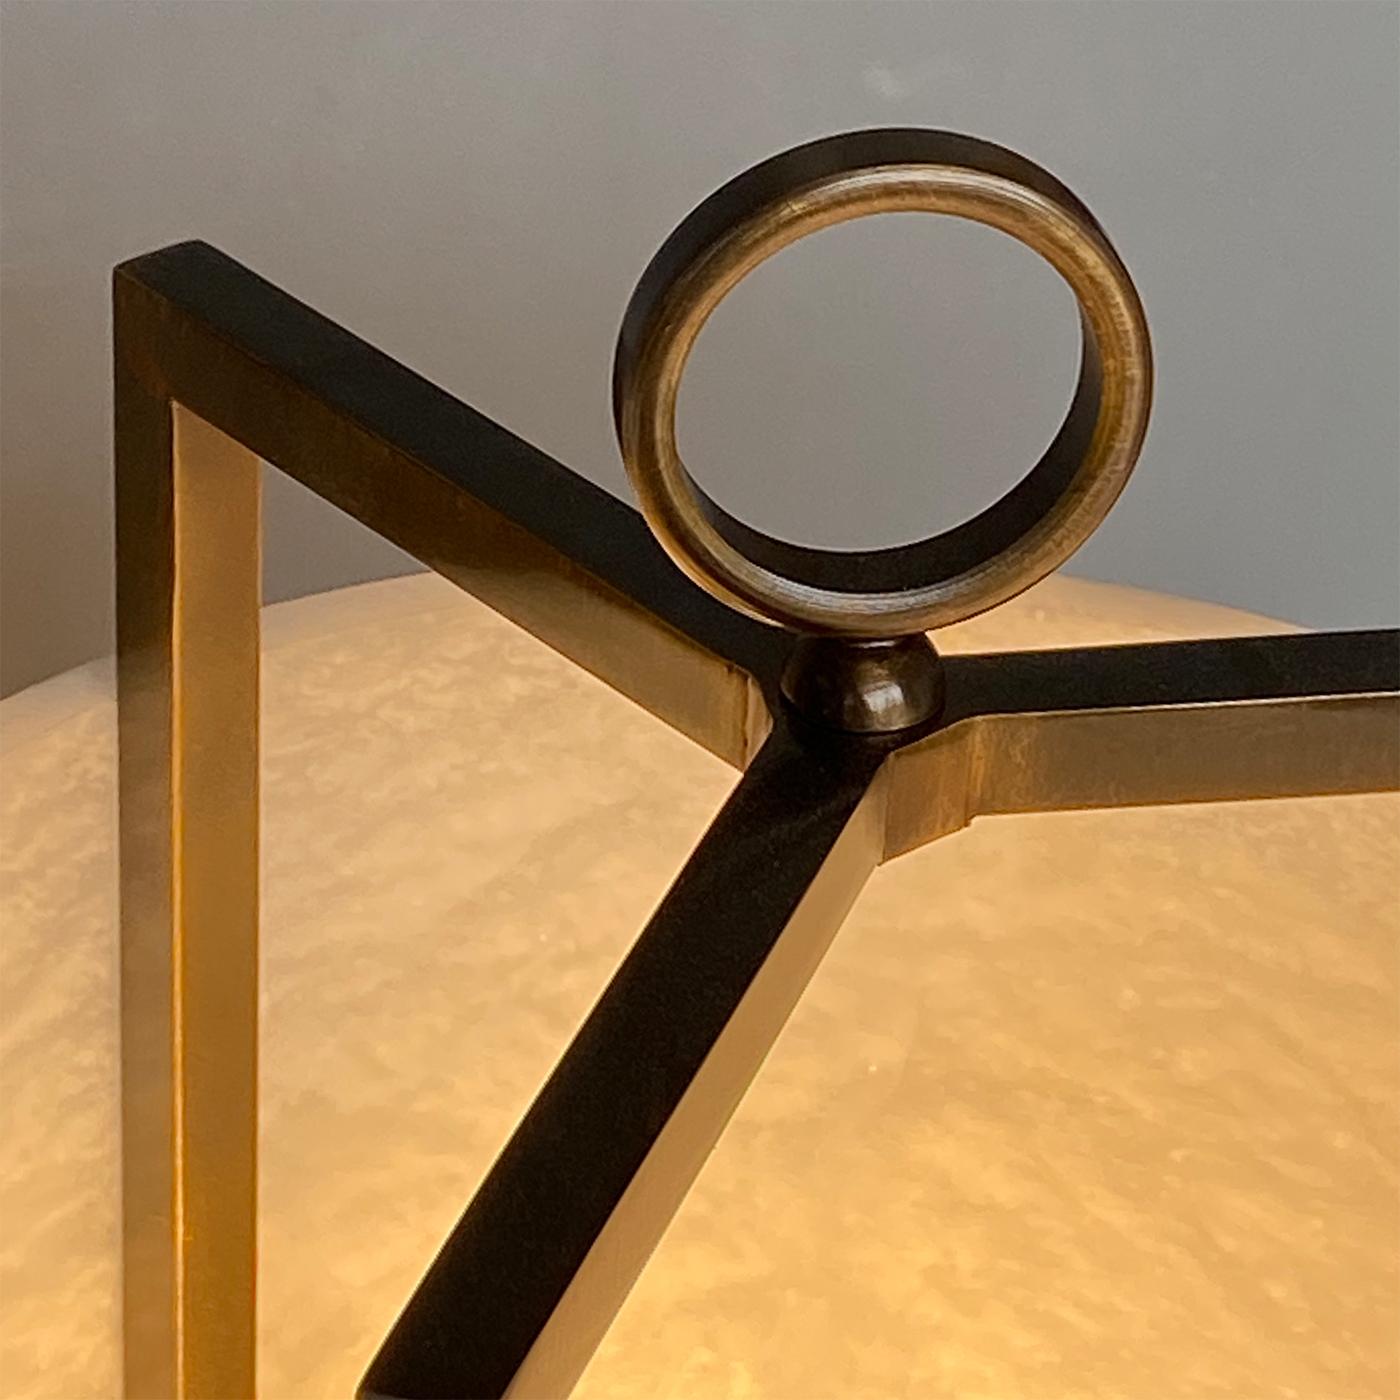 The alabaster Lantern is a table lamp that can easily be placed on the floor. It combines the ethereal allure of the alabaster, evidencing its veining, in contrast with the dark warm effect of the bronze finish. This lamp is composed of a tripodal